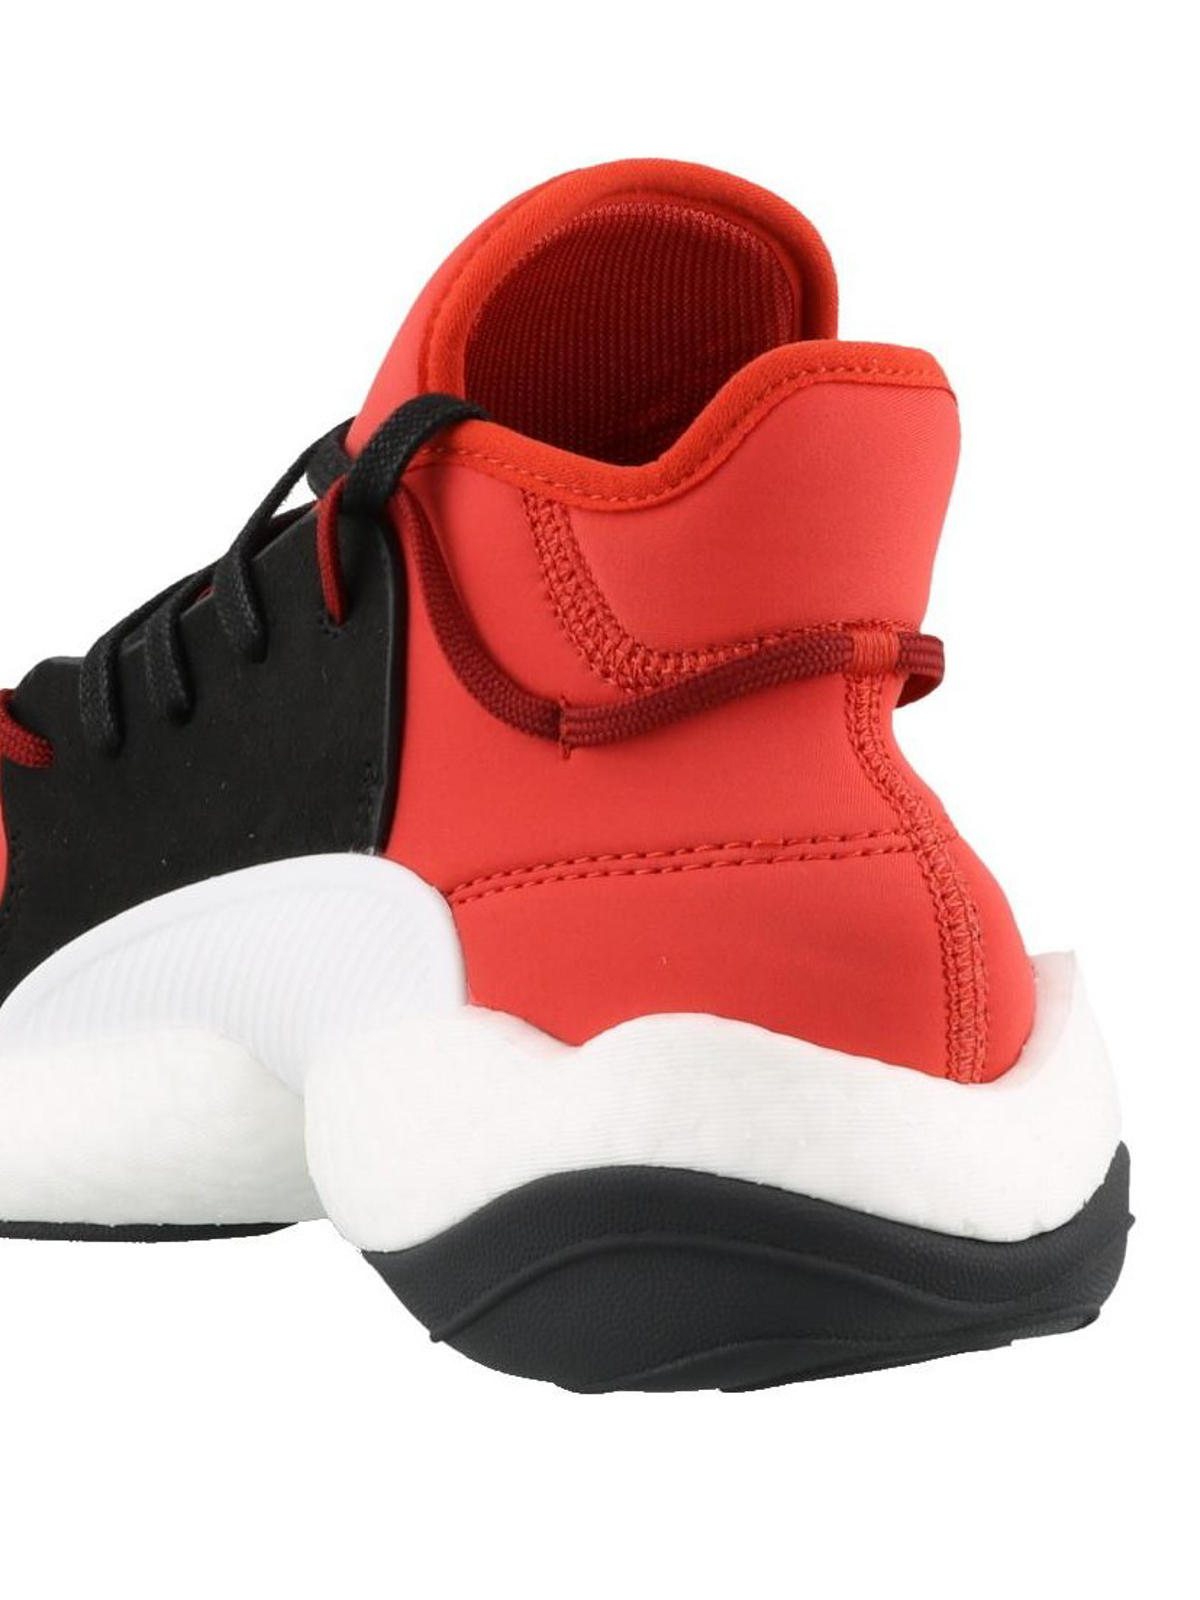 Trainers Adidas Y-3 - Byw B-Ball Red Black And White Sneakers - Bc0338